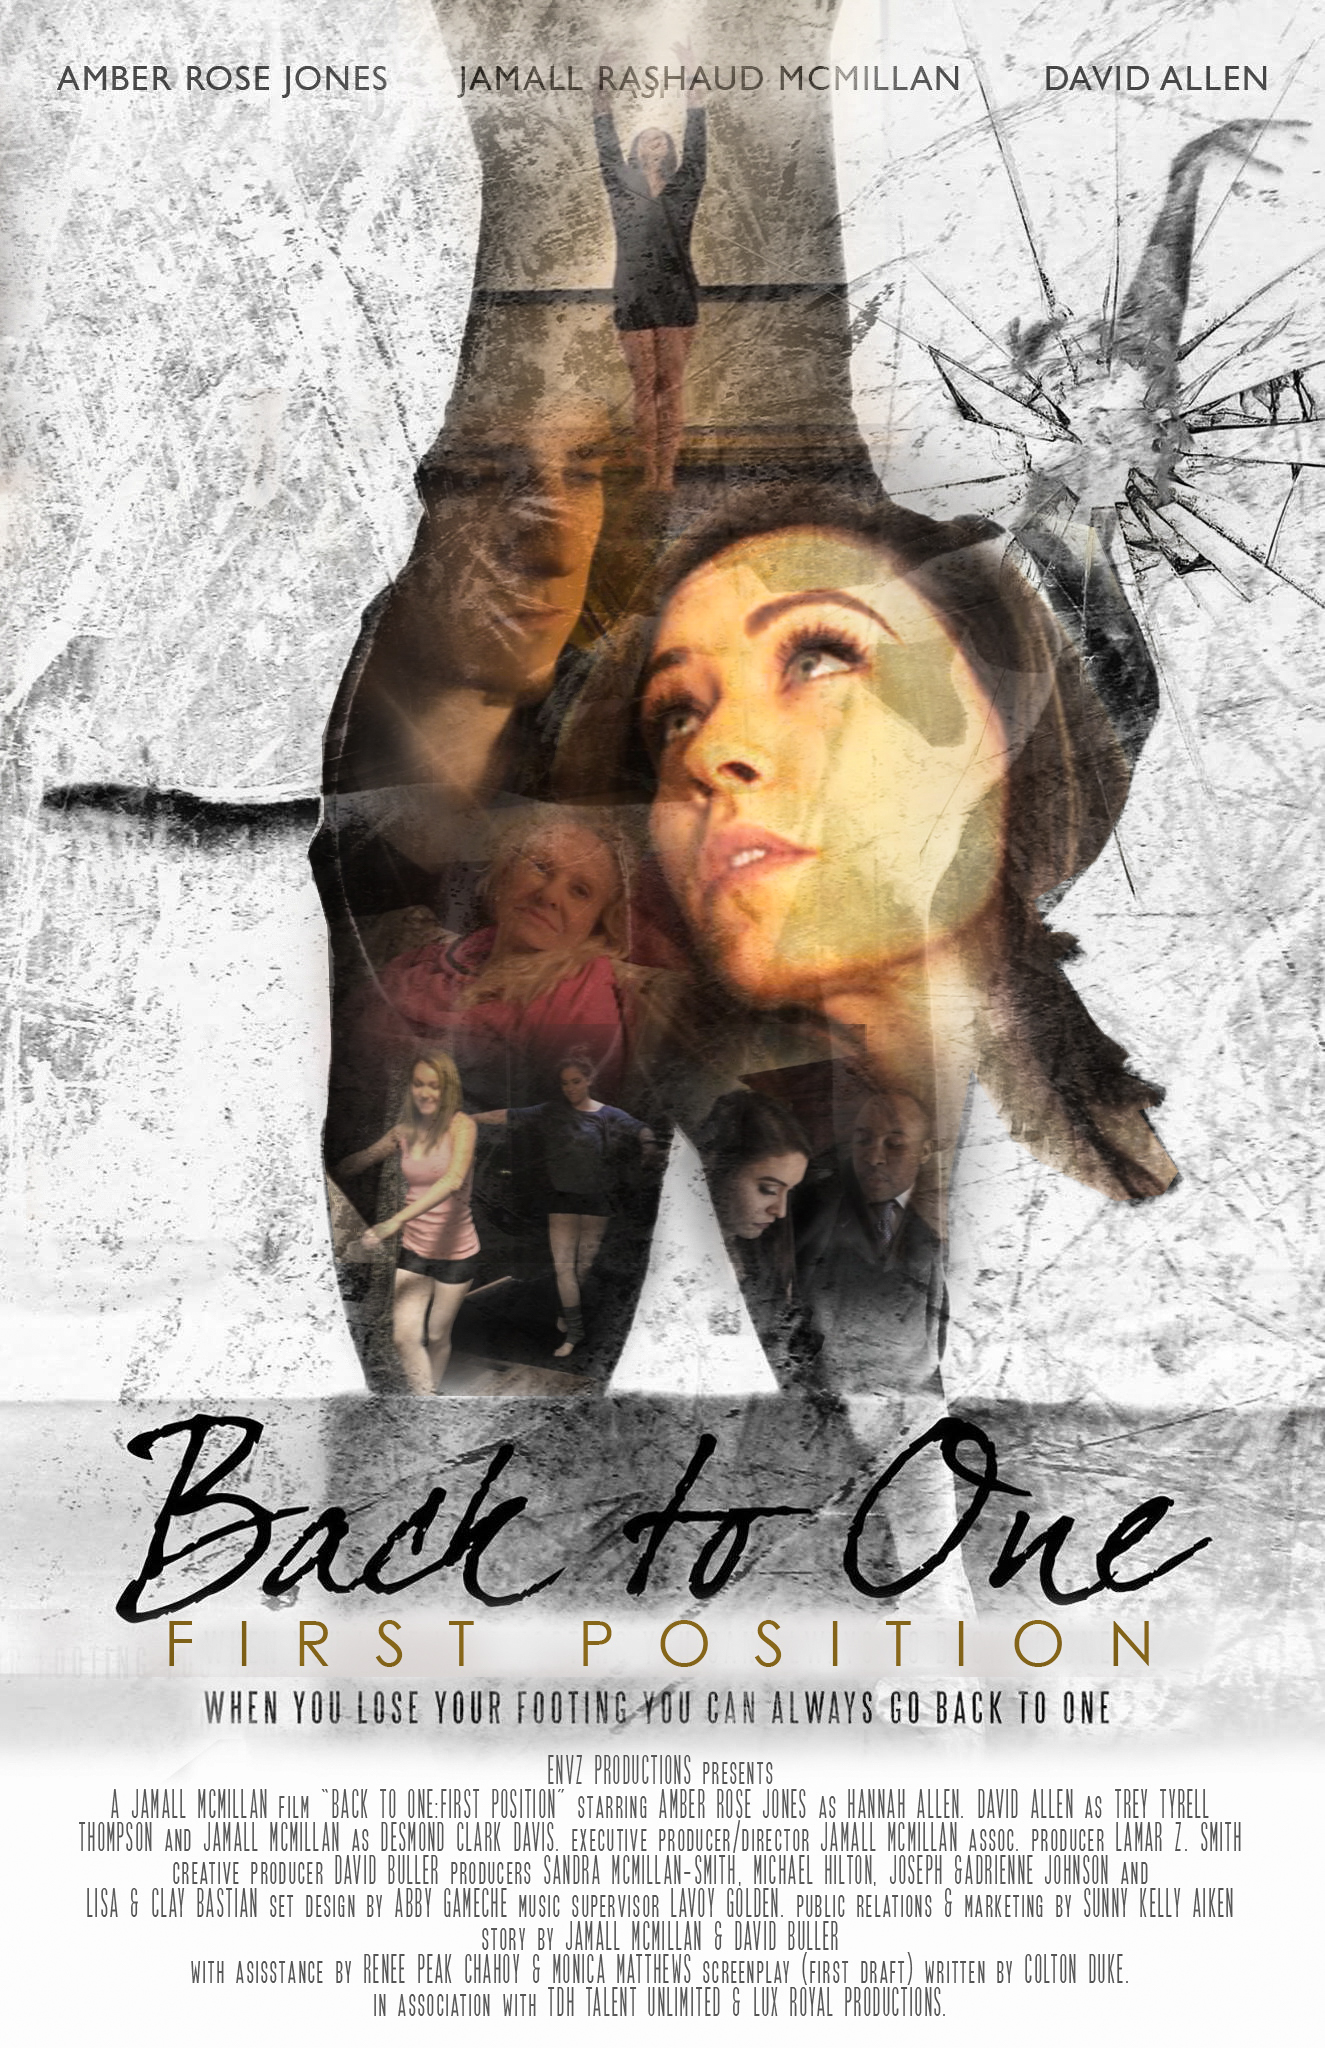 Back to One: First Position